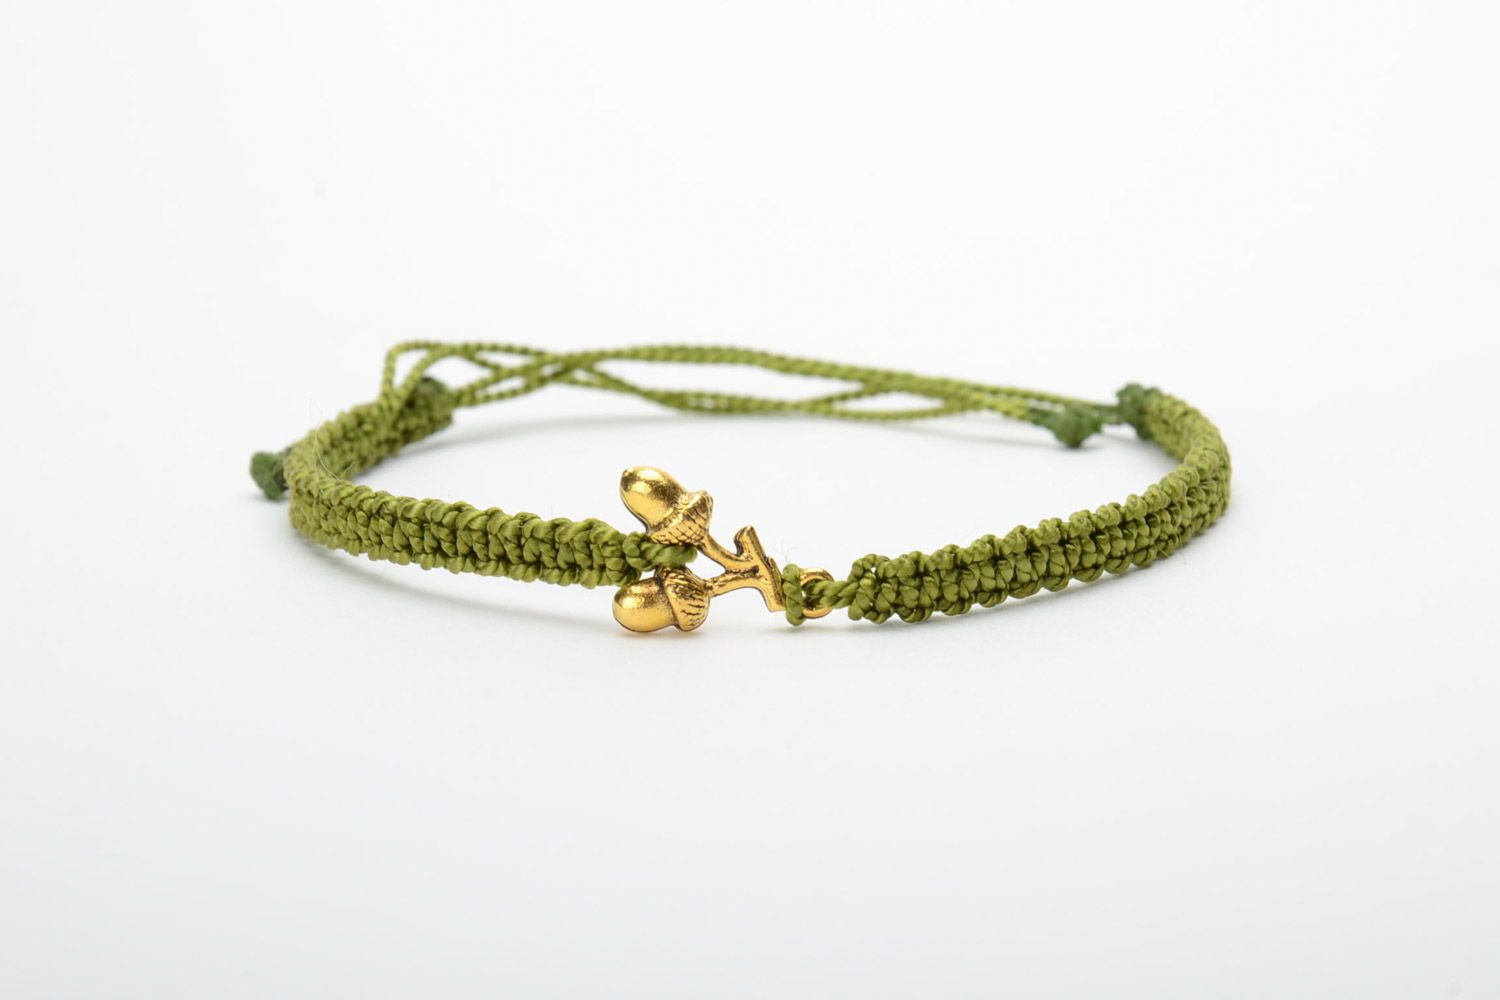 Women's handmade macrame woven thread bracelet of green color with metal charms in the shape of acorns photo 5